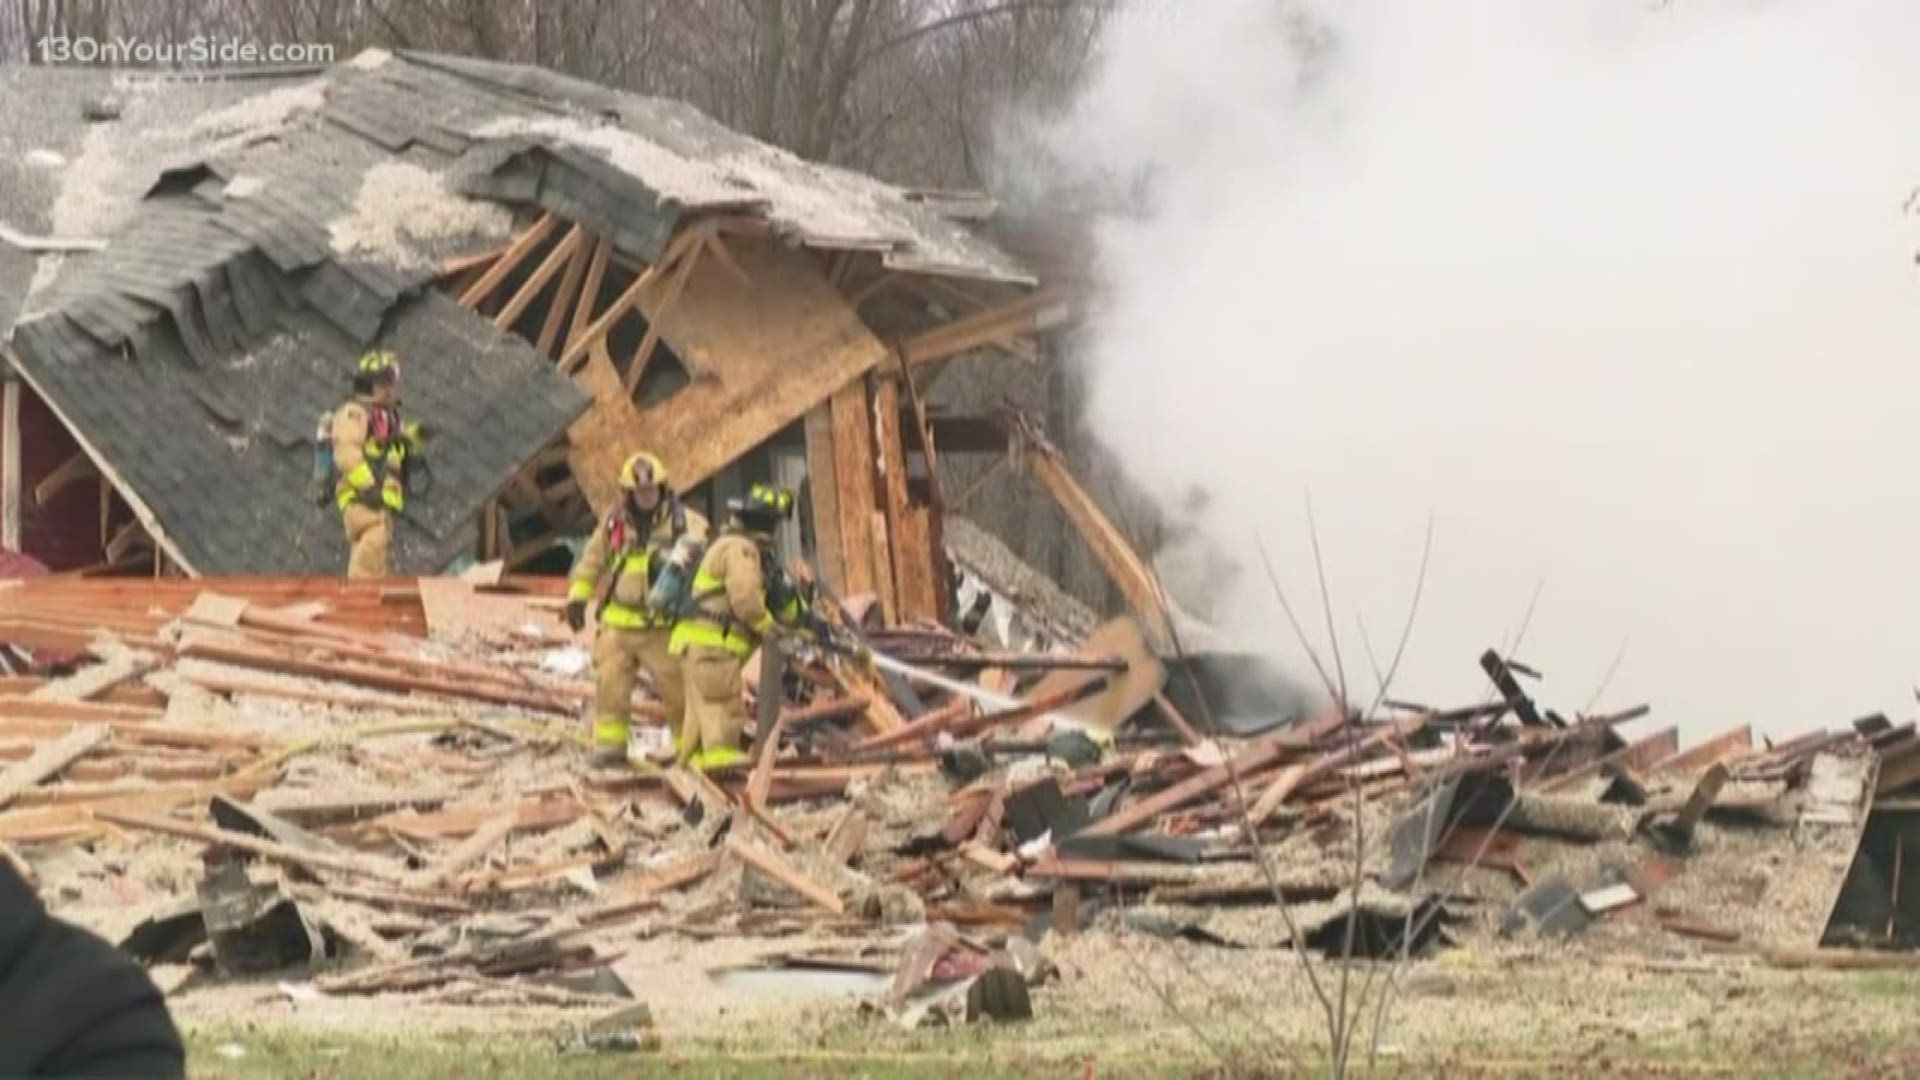 A 17-year-old and his father were injured when their house exploded Tuesday afternoon. They were taken to an area hospital after being burned on their hands and face